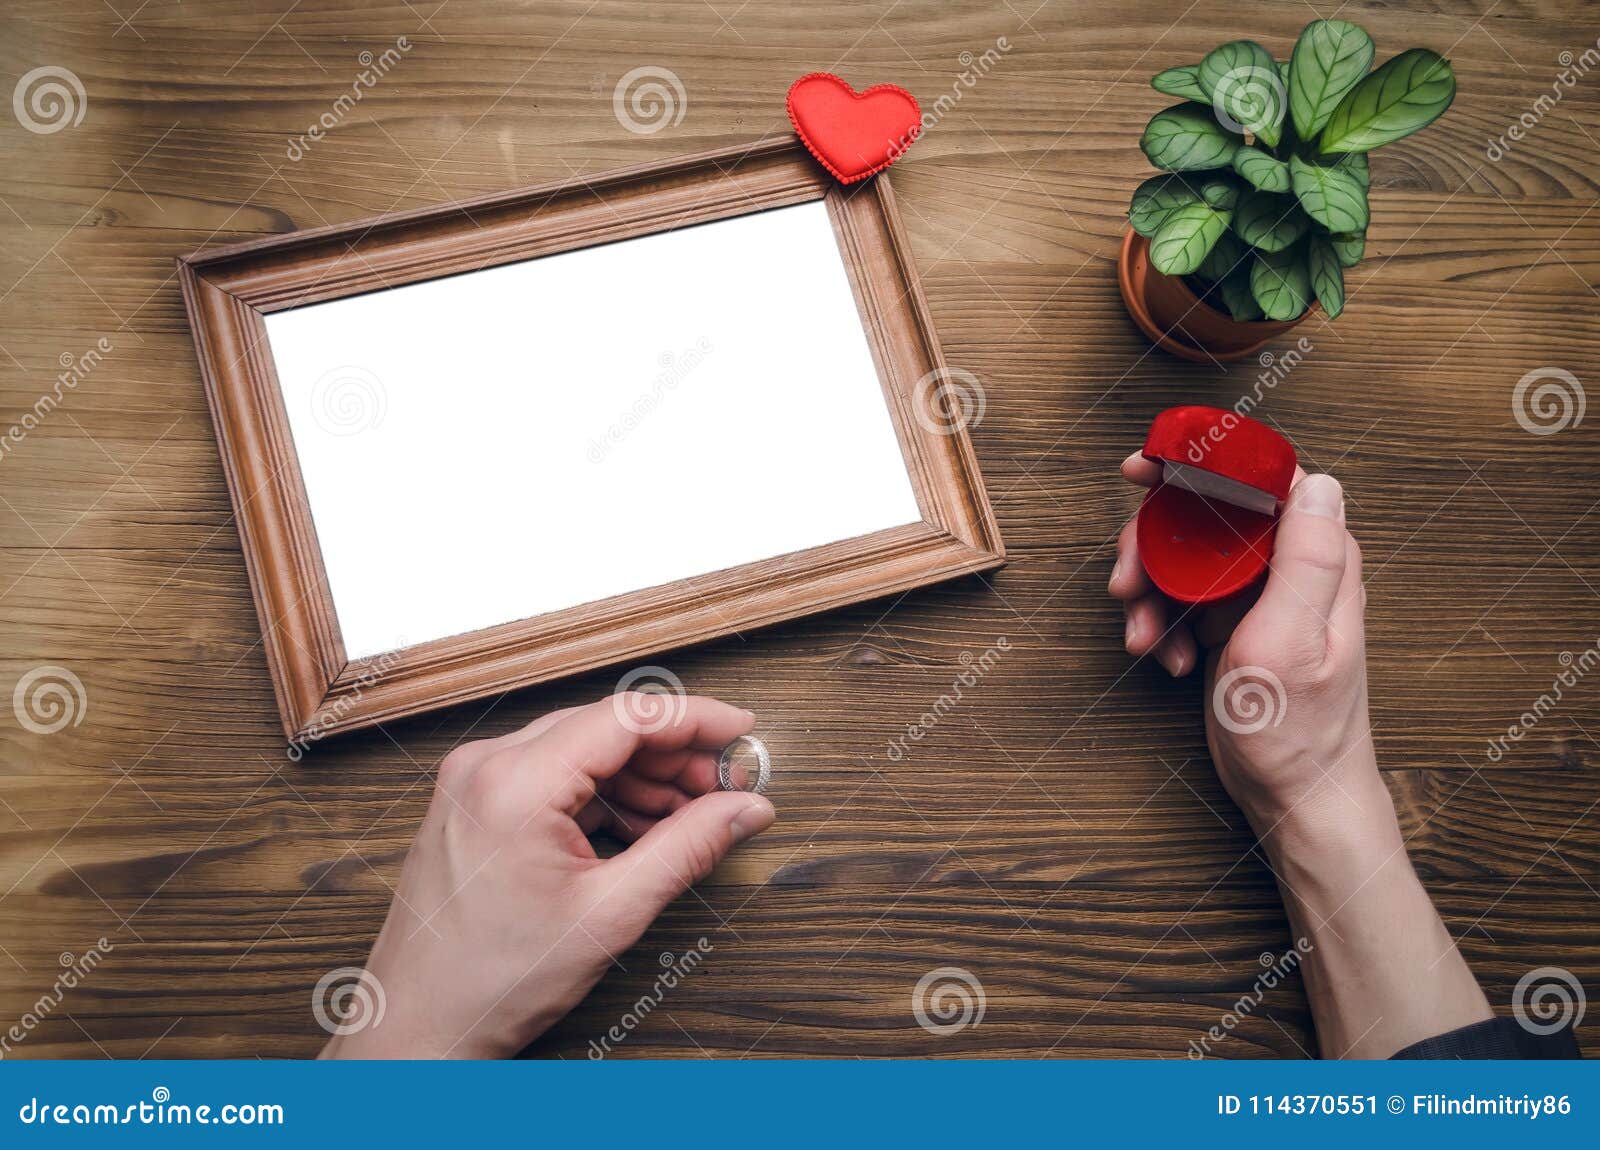 Miss You Concept. Love Photo Frame. Stock Image - Image of mock ...